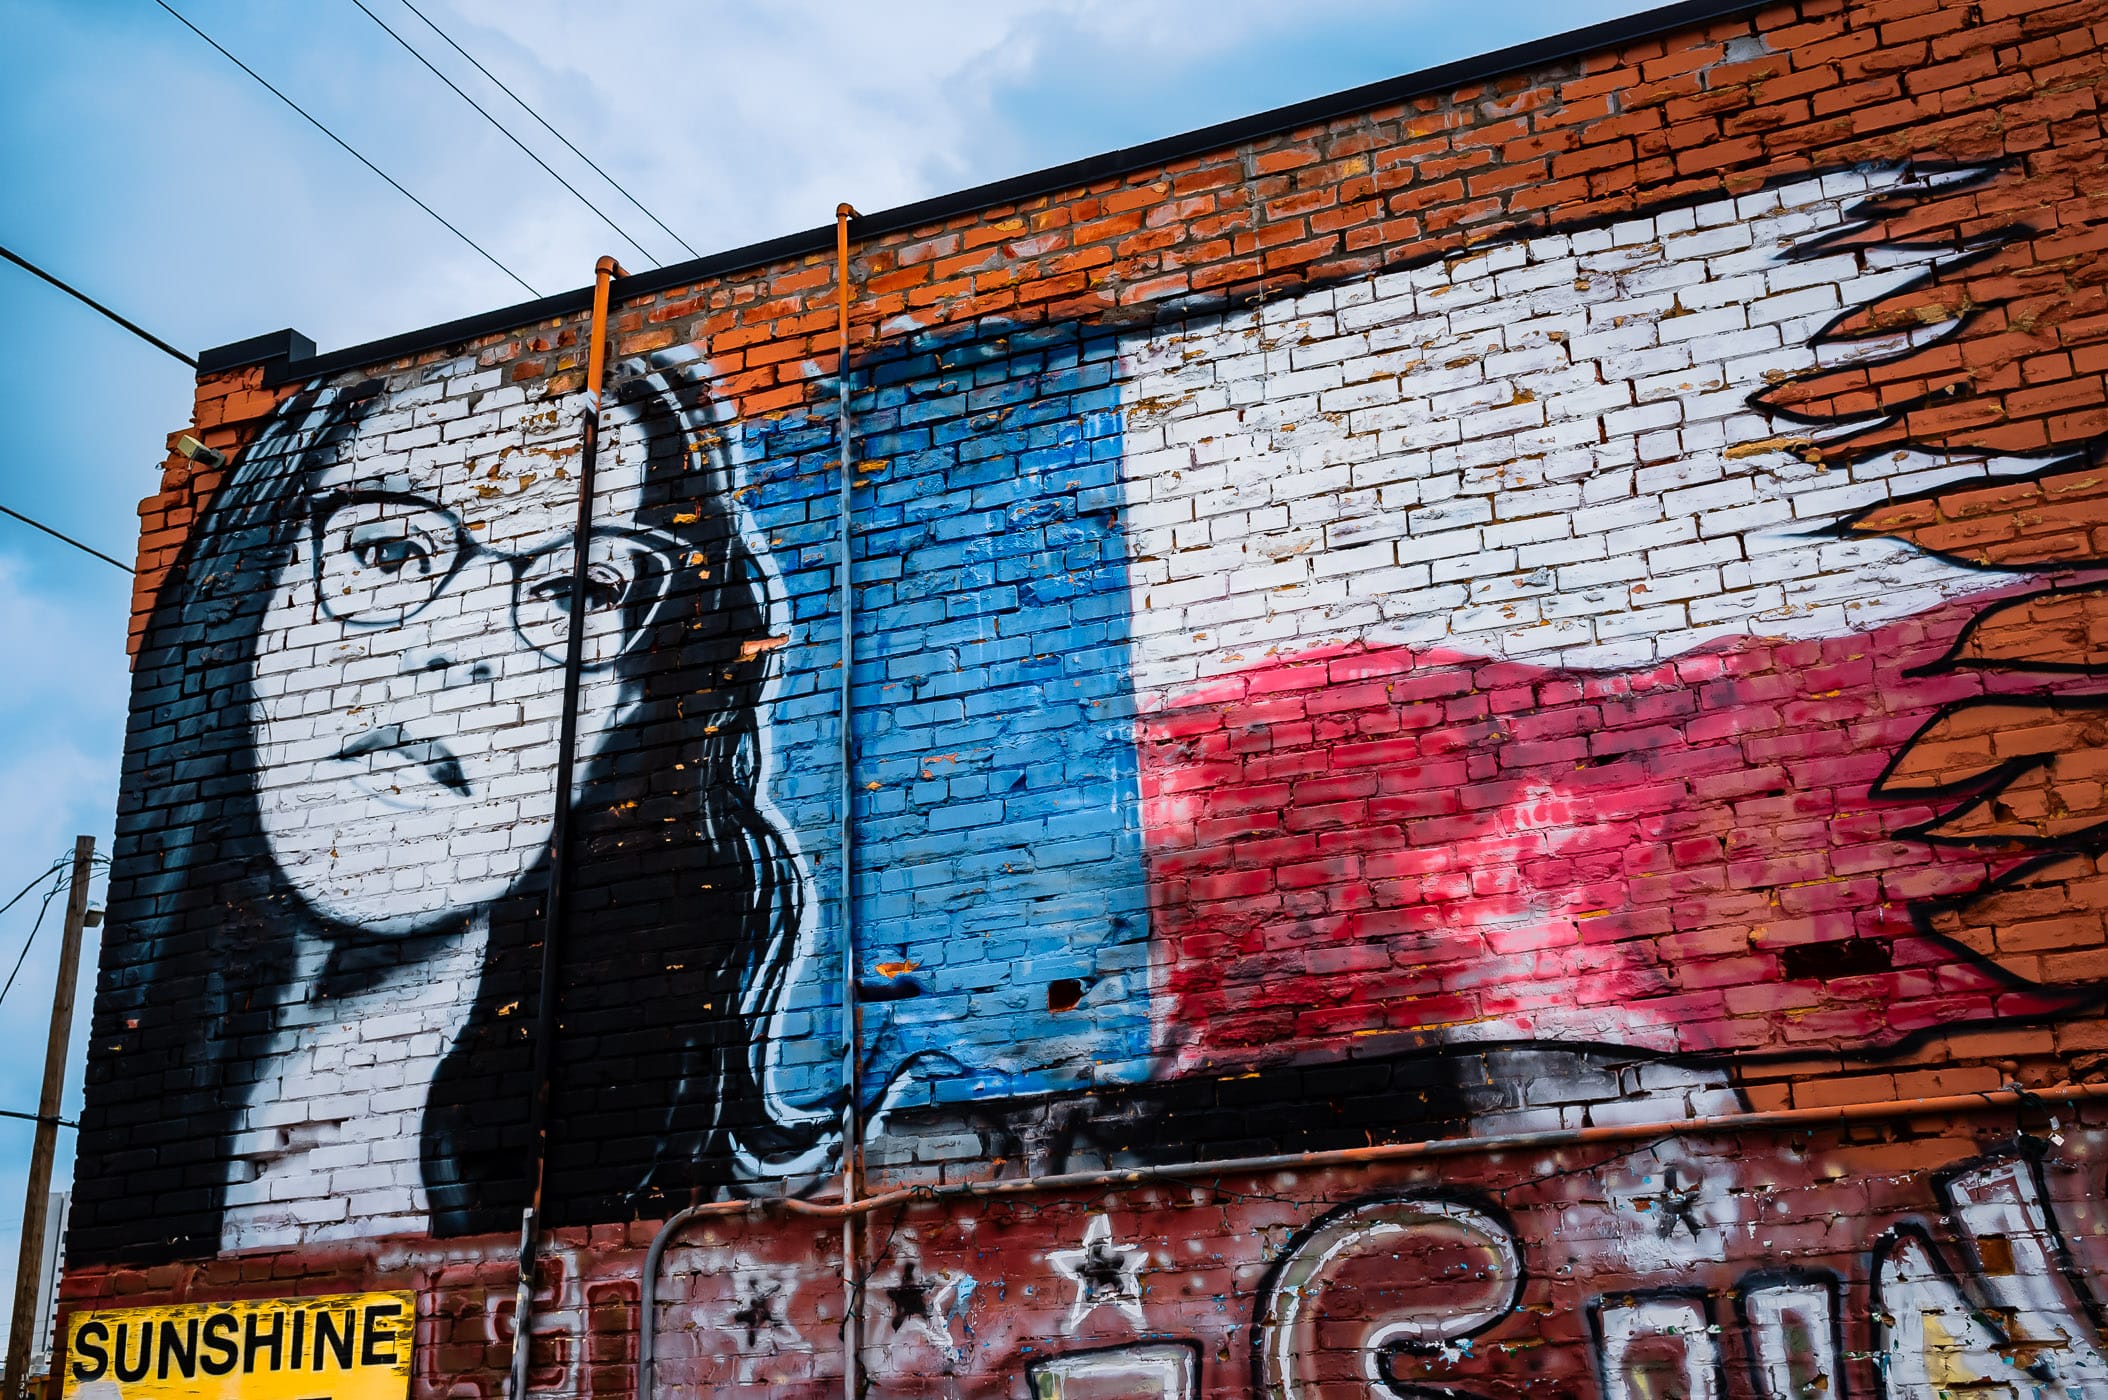 A mural of singer-songwriter Lisa Loeb and a stylized Texas flag, found in Dallas' Deep Ellum neighborhood.